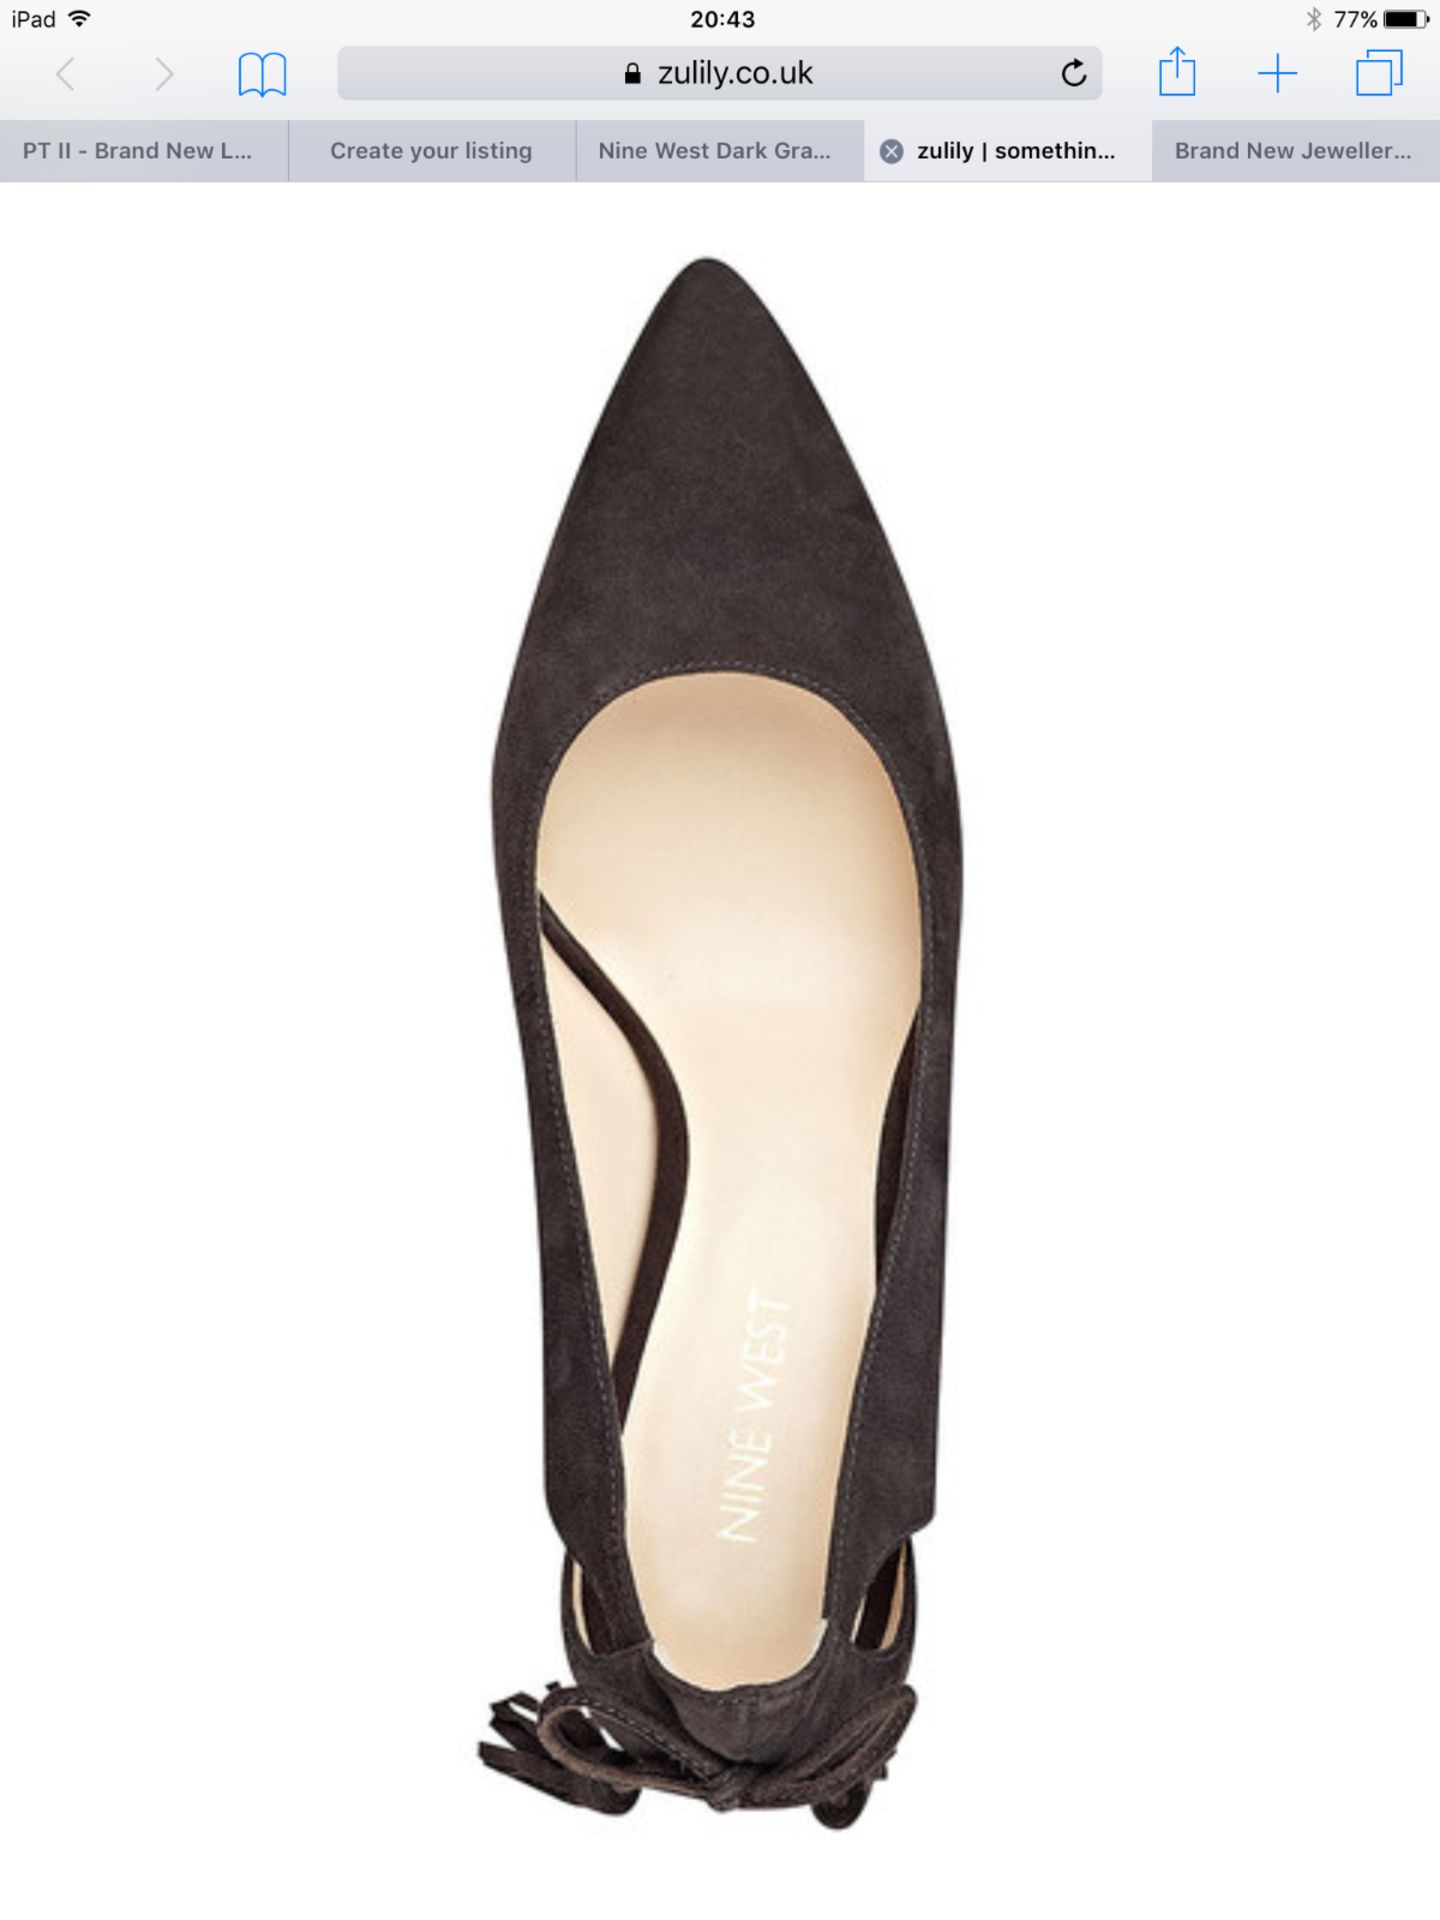 Nine West Dark Grey Modesty Suede Shoe, Size Eur 38 (New with box) [Ref: D-003] - Image 3 of 6